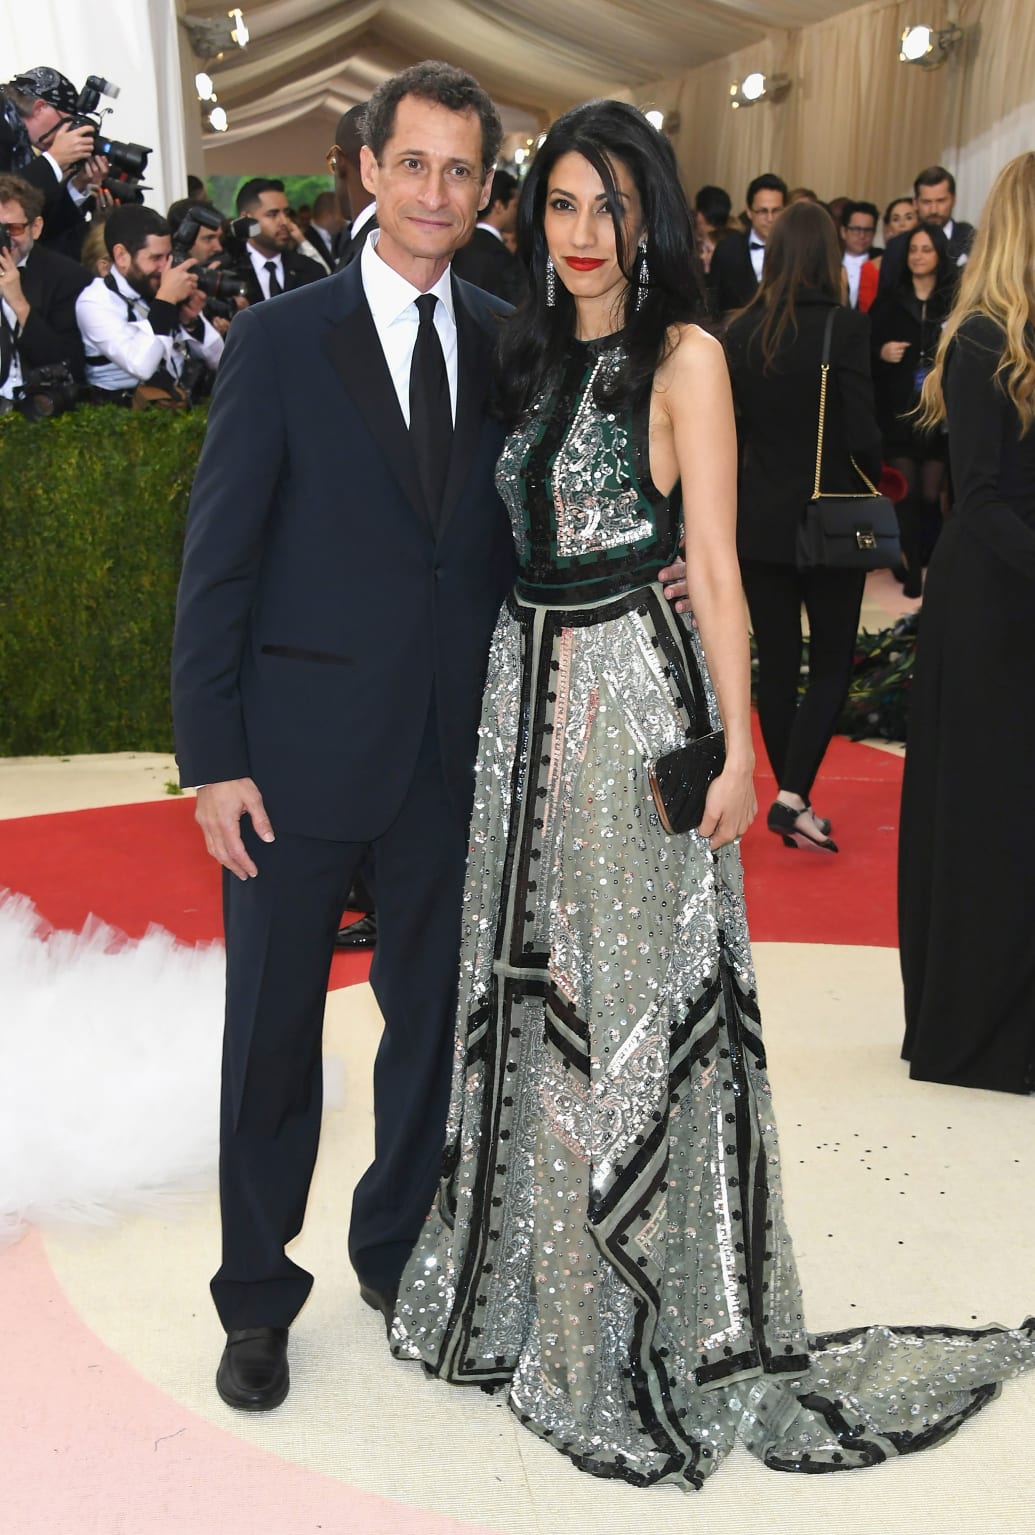 Anthony Weiner and Huma Abedin pose at the 2016 Met Gala